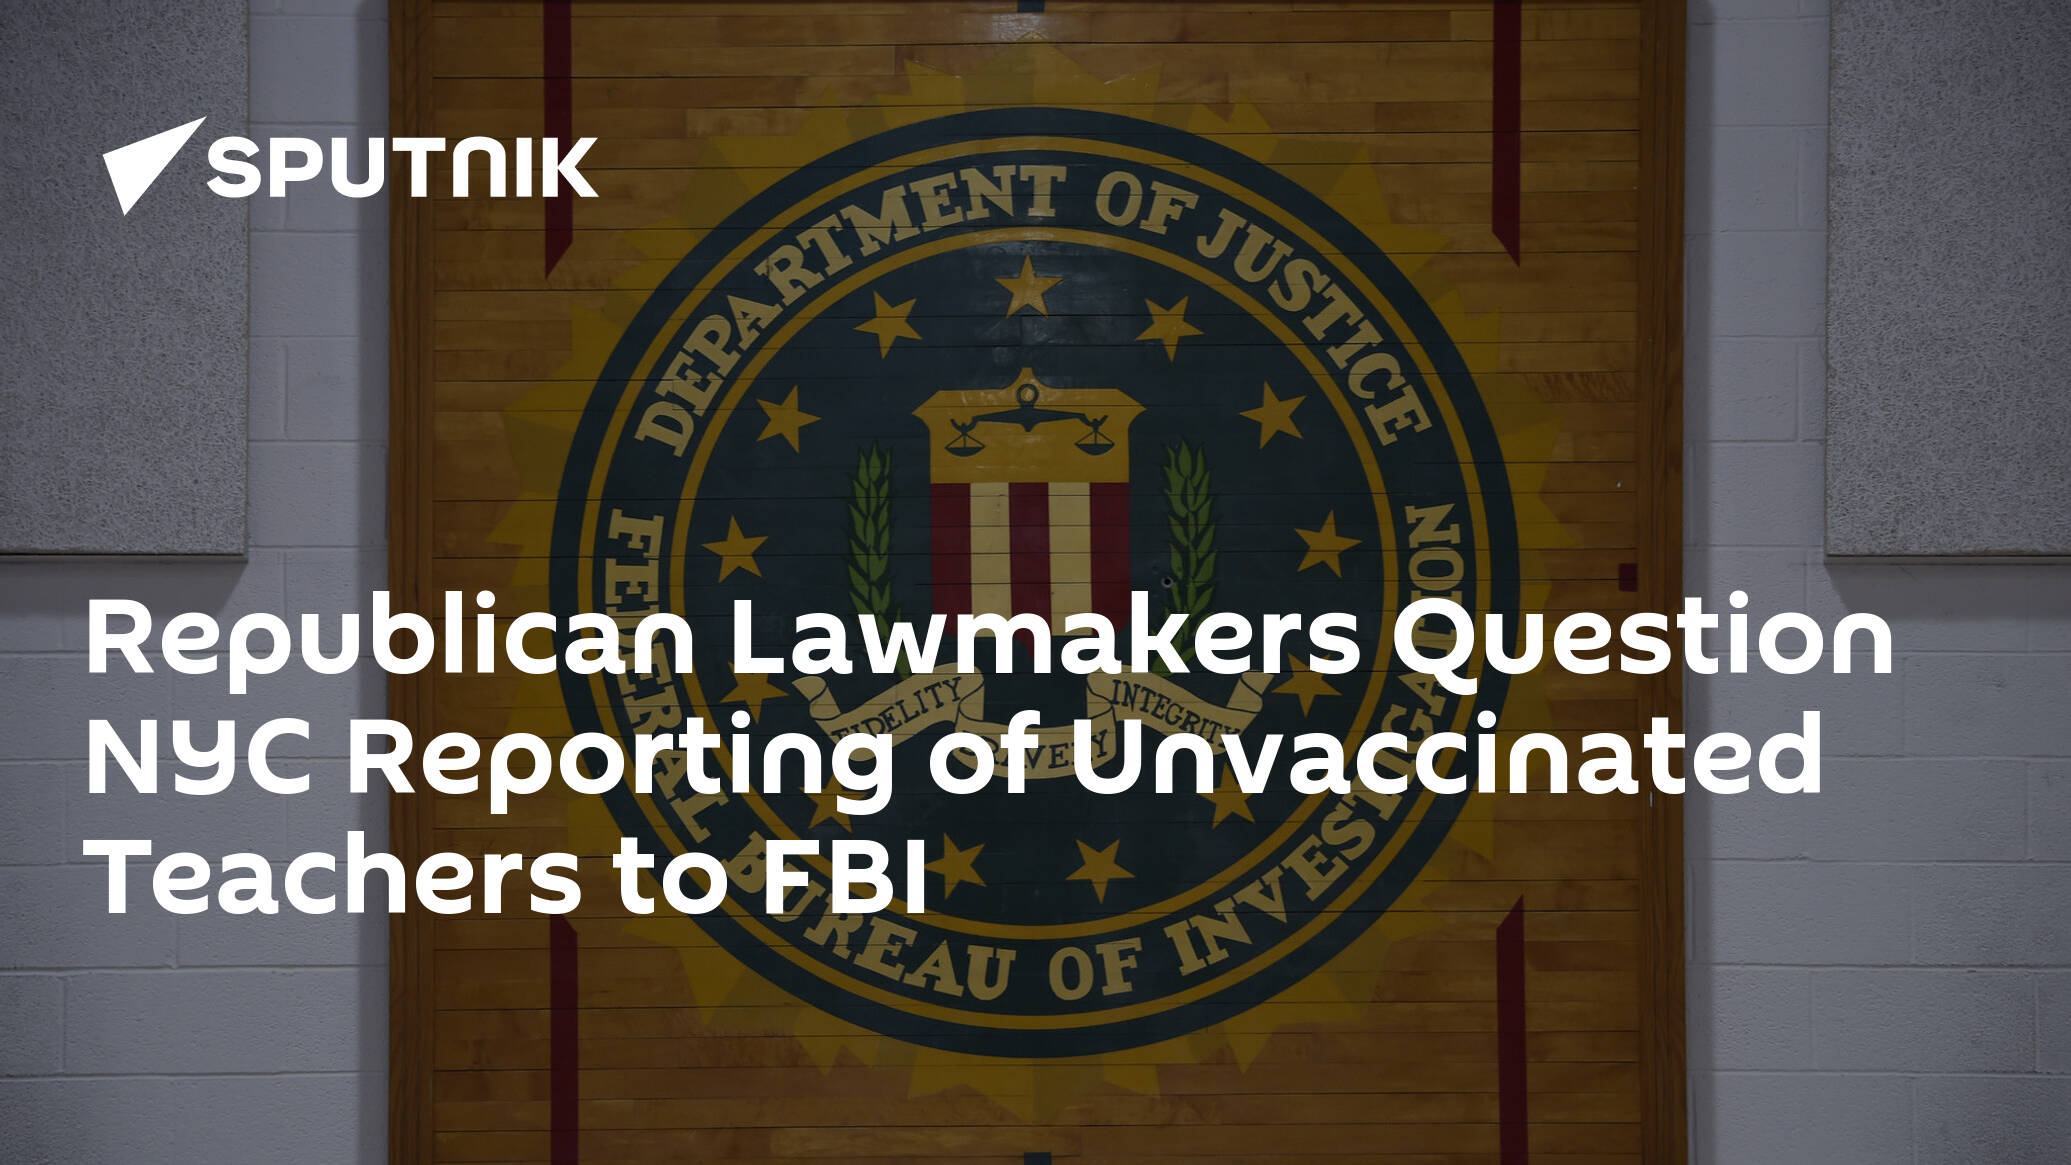 Republican Lawmakers Question NYC Reporting of Unvaccinated Teachers to FBI